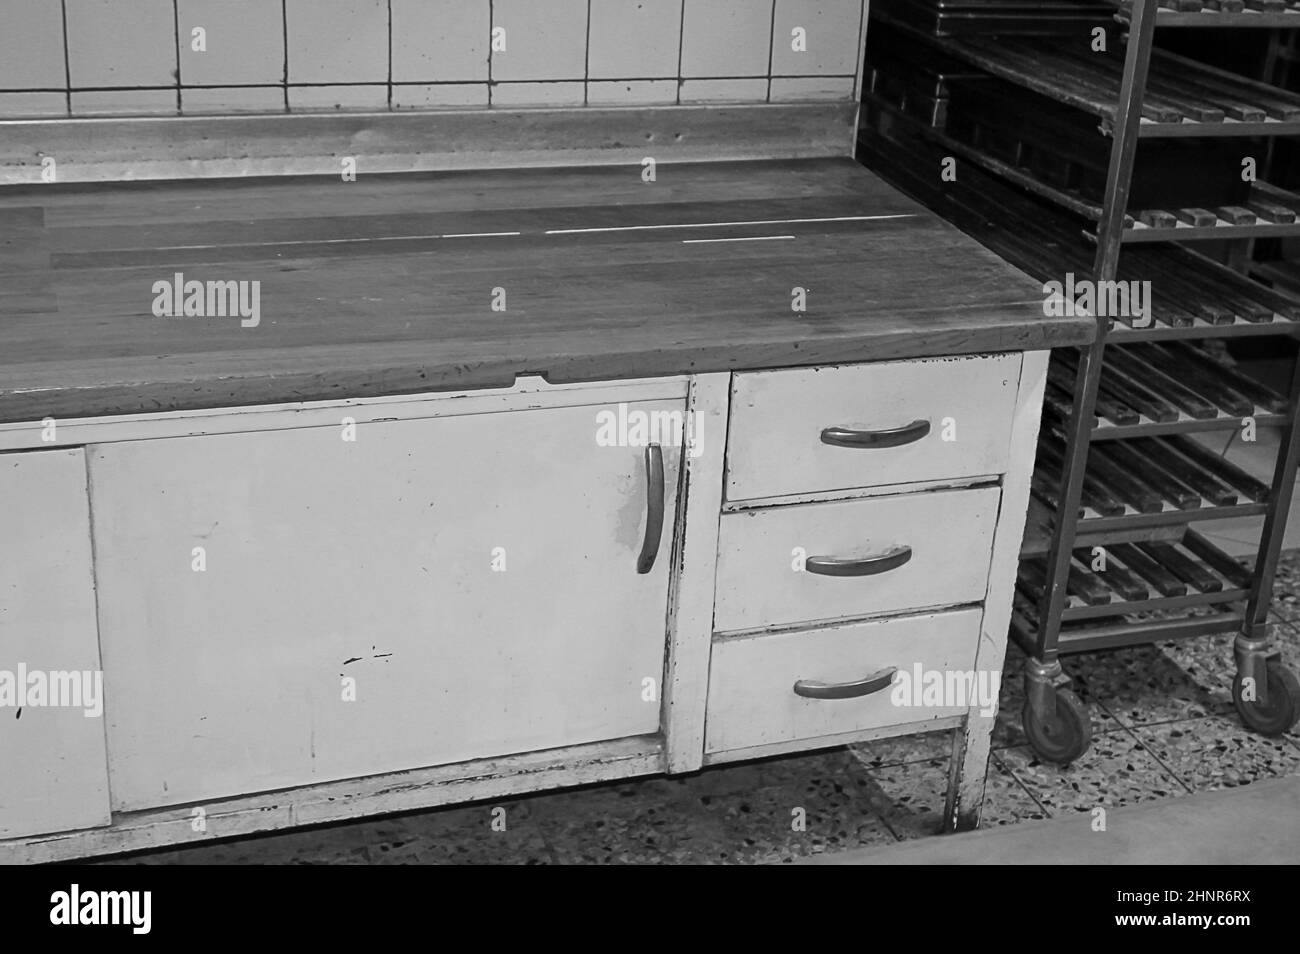 A look into an old bakery, work table and storage compartments for baked goods. Stock Photo